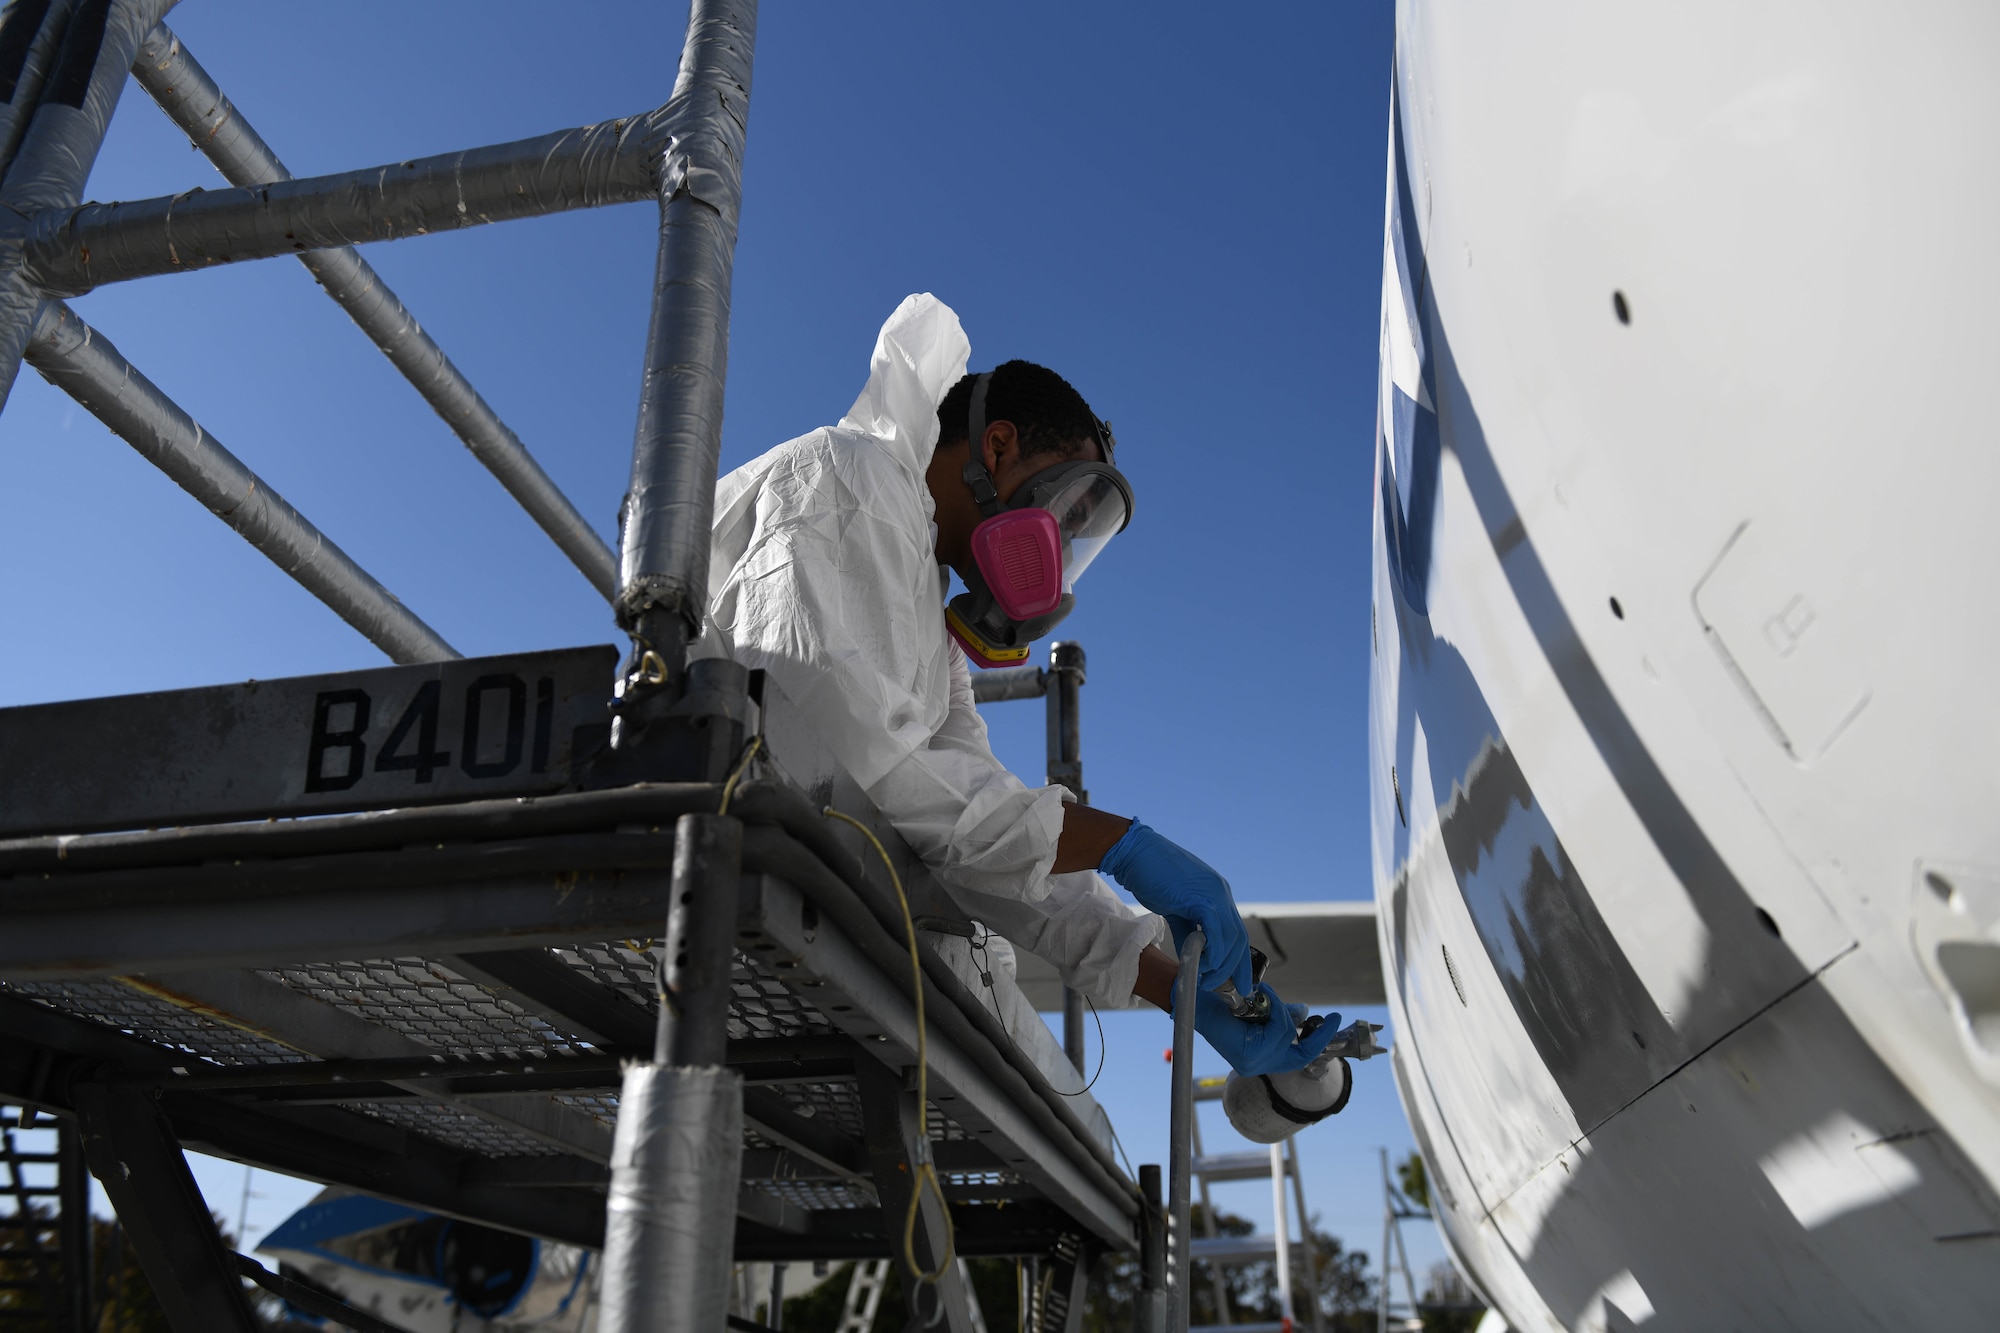 U.S. Air Force Airman 1st Class Tracy Bethea, 509th Maintenance Squadron low-observable maintenance technician, paints the side of the Boeing B-47 Stratojet hull on display at Whiteman Air Force Base, Missouri, Oct. 13, 2020. The aircraft’s restoration had to meet the standards set by the United States Air Force Museum. (U.S. Air Force photograph by Airman 1st Class Devan Halstead)